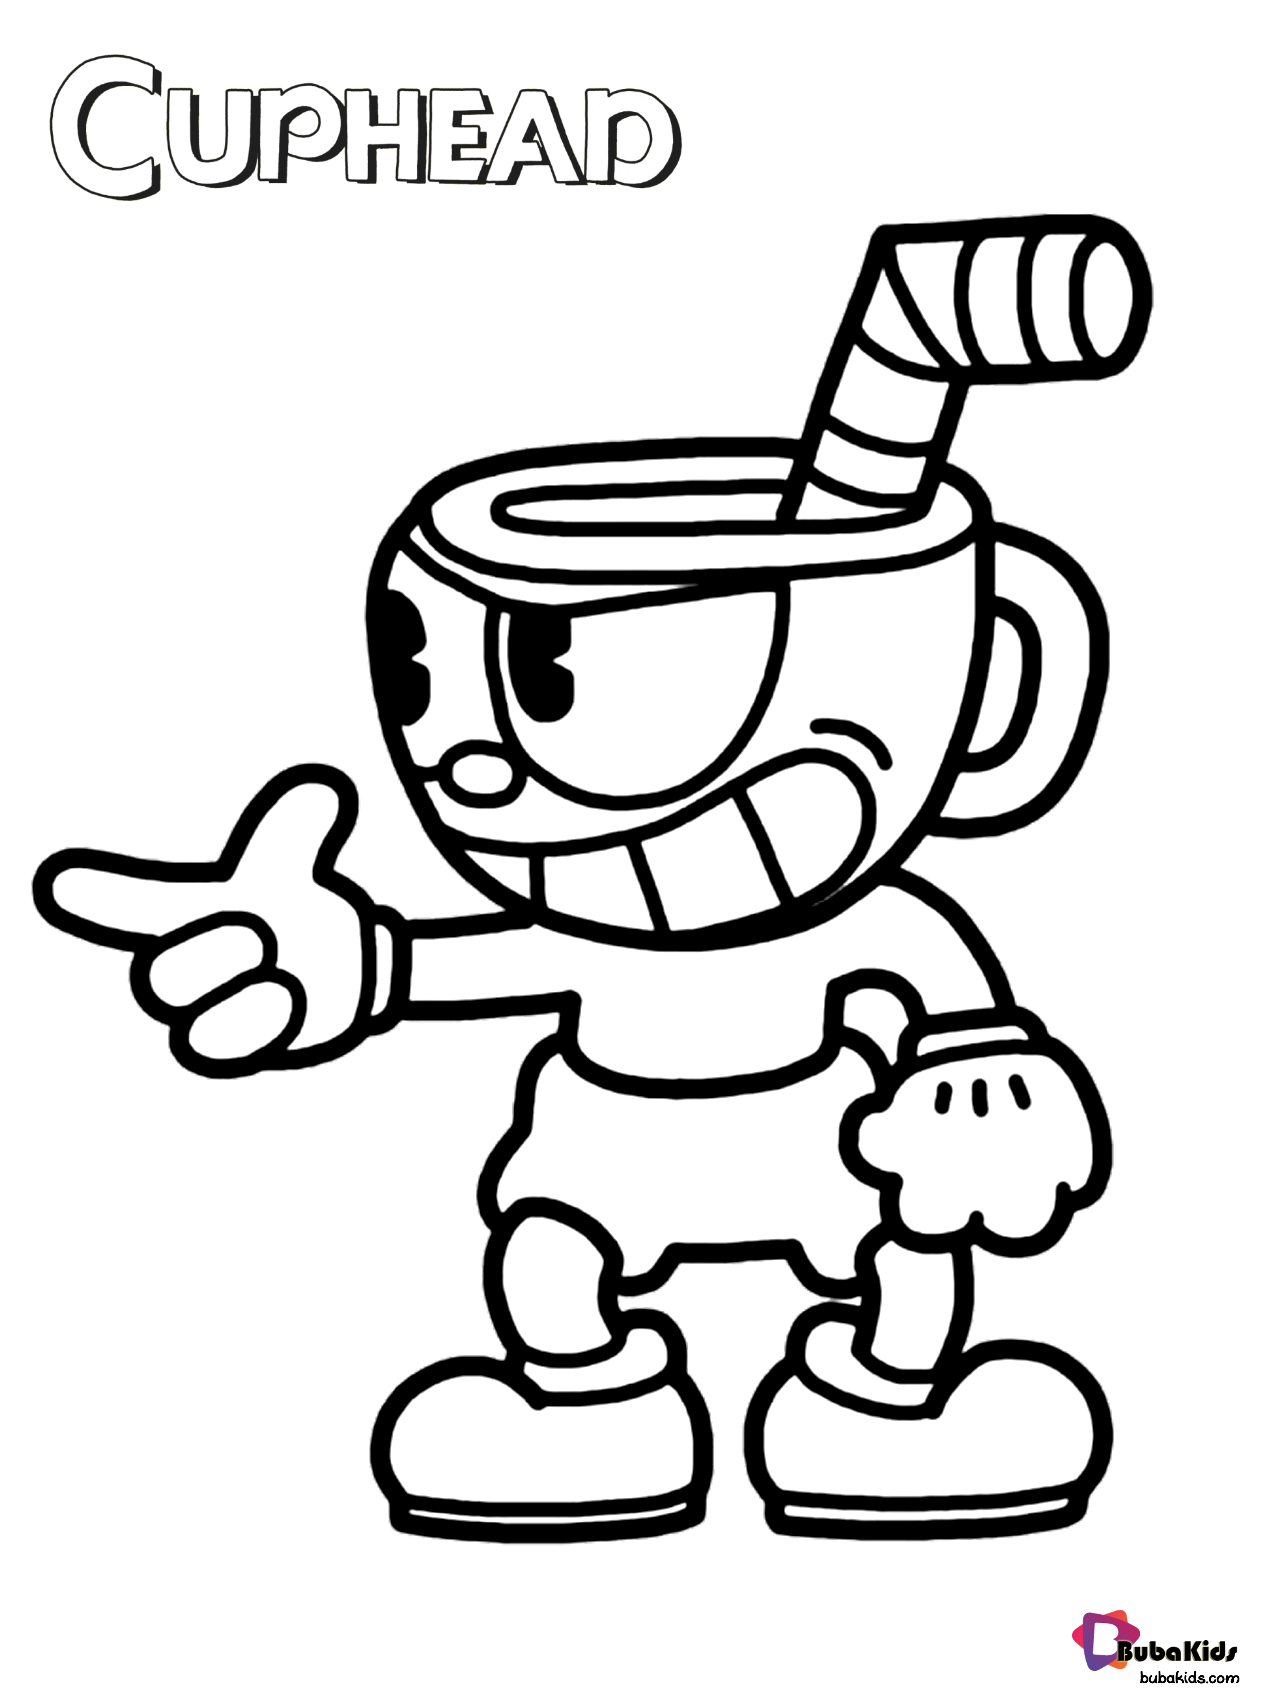 Free cuphead cartoon coloring pages Wallpaper